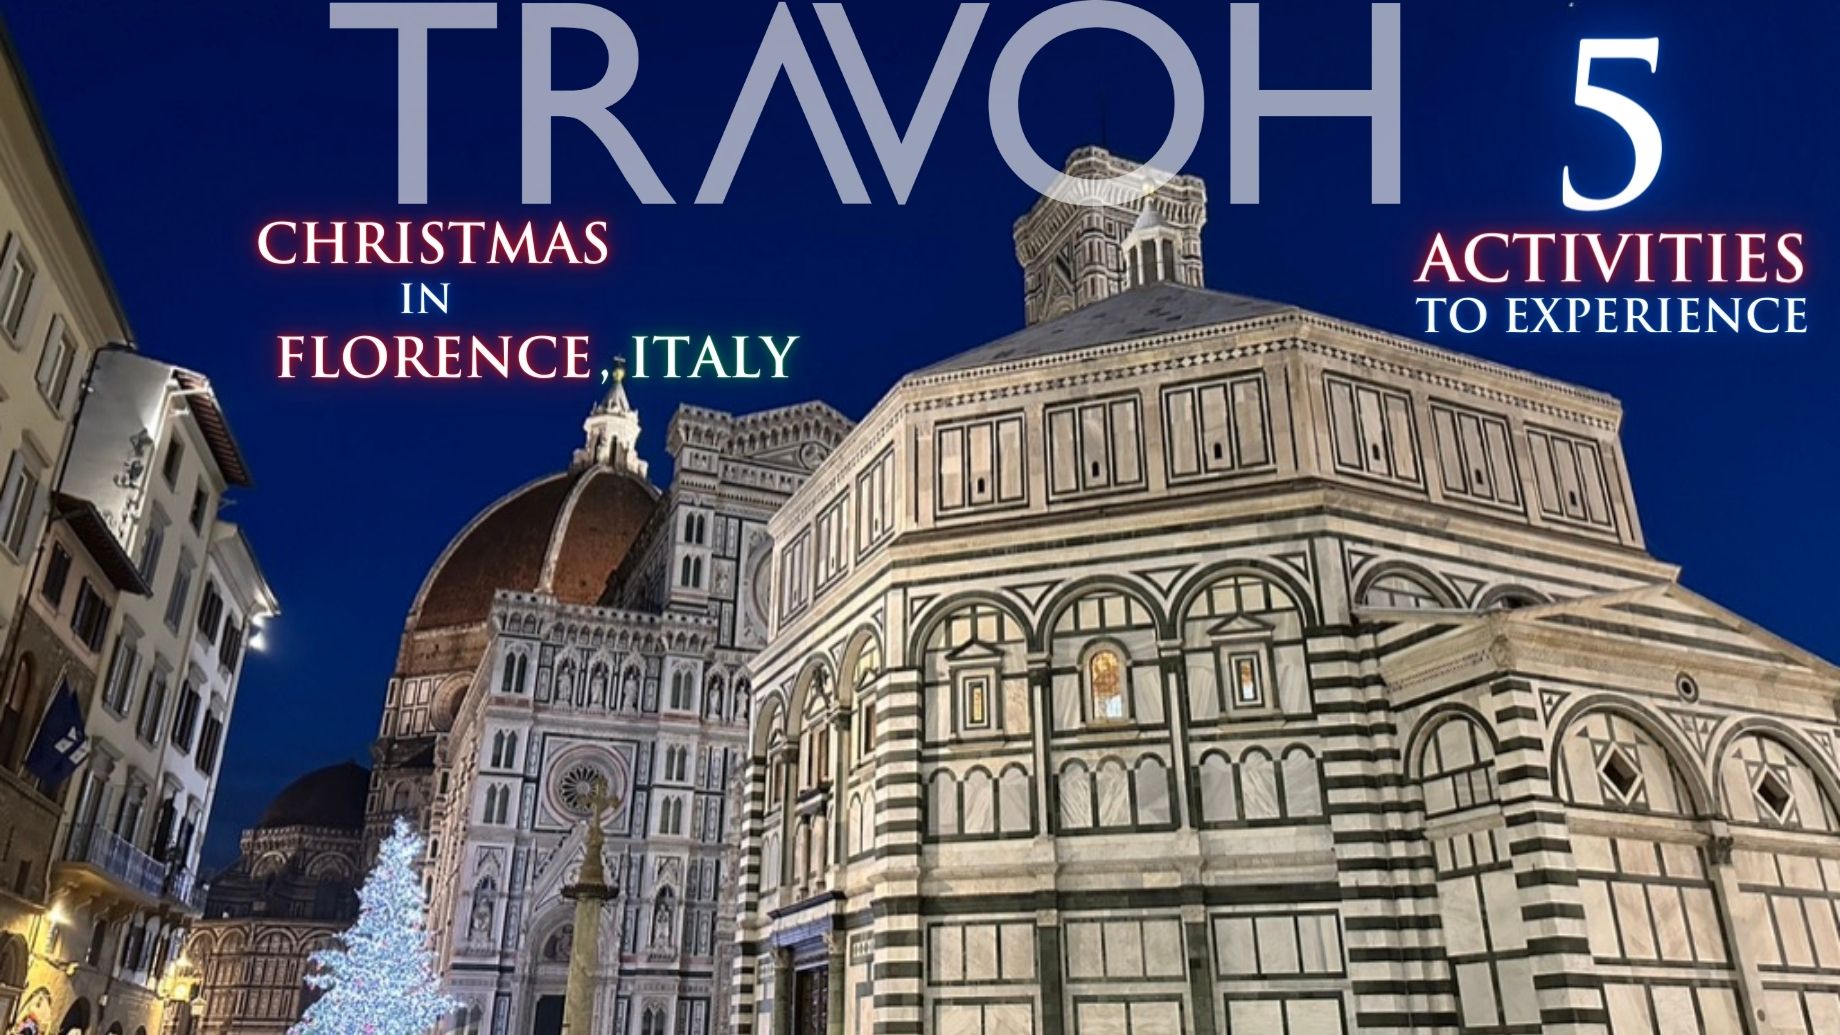 Christmas in Florence, Italy - Top 5 Activities To Experience